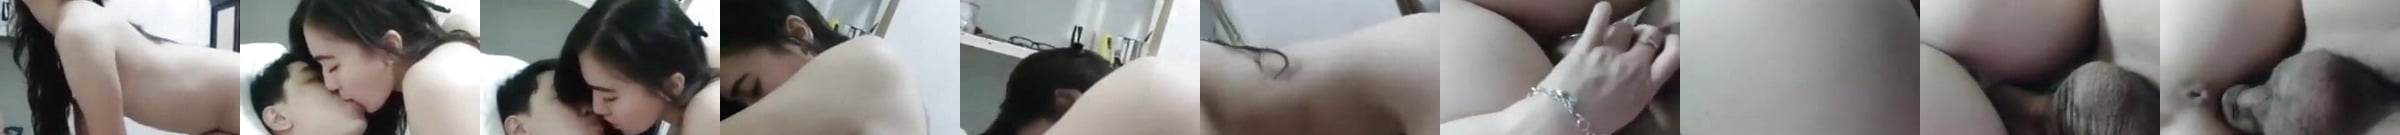 Featured Indonesian Girl Porn Videos Xhamster